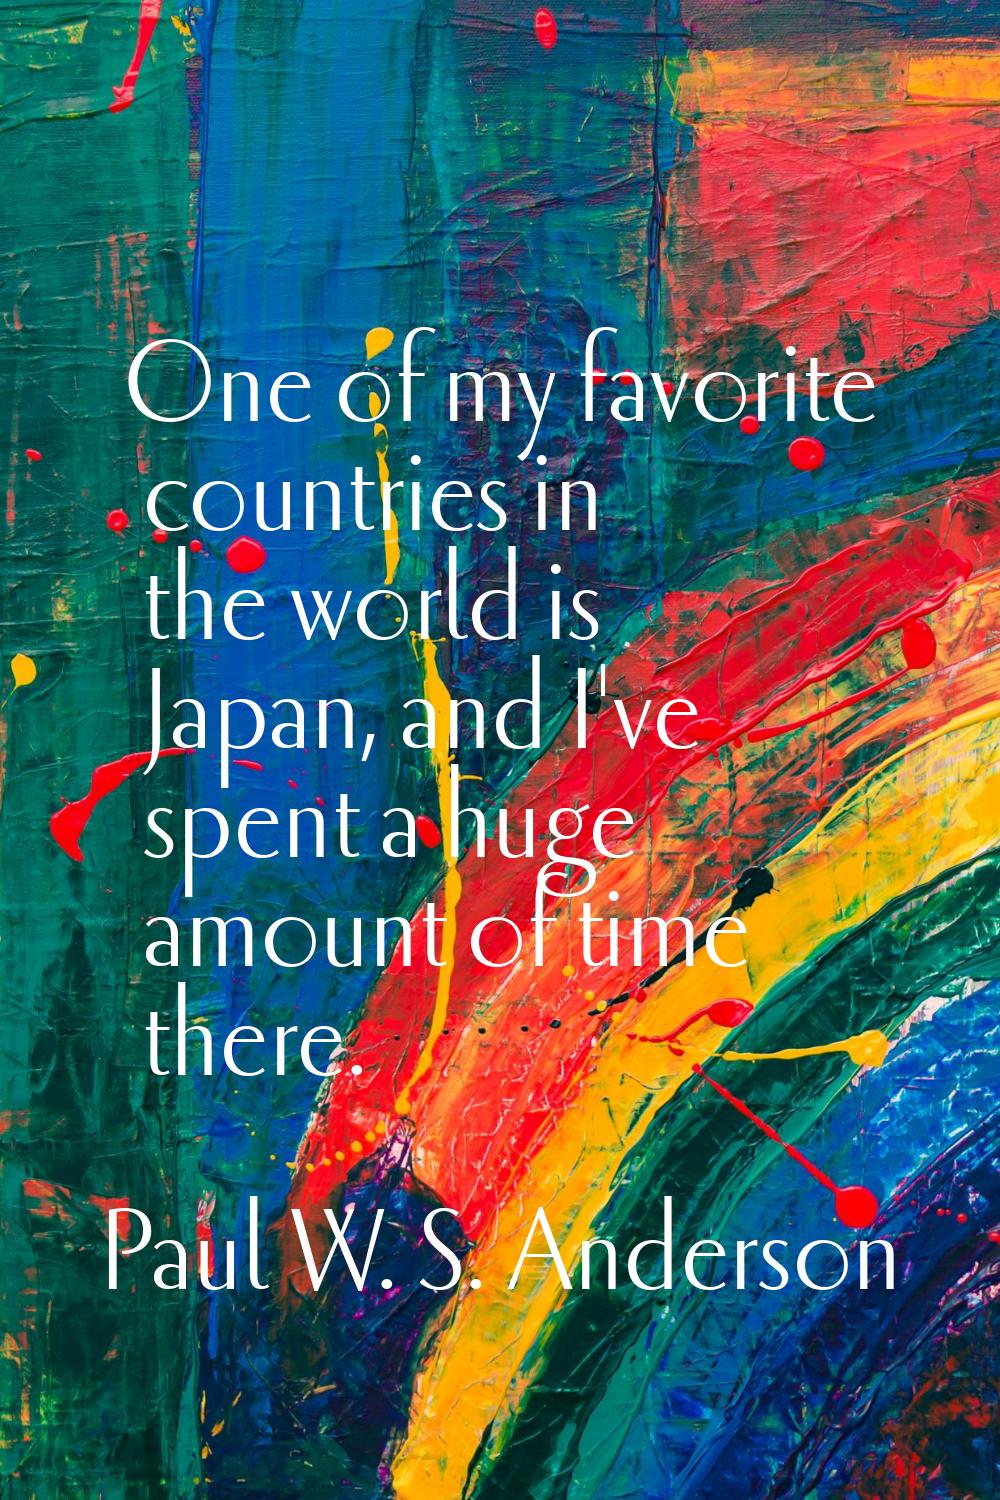 One of my favorite countries in the world is Japan, and I've spent a huge amount of time there.